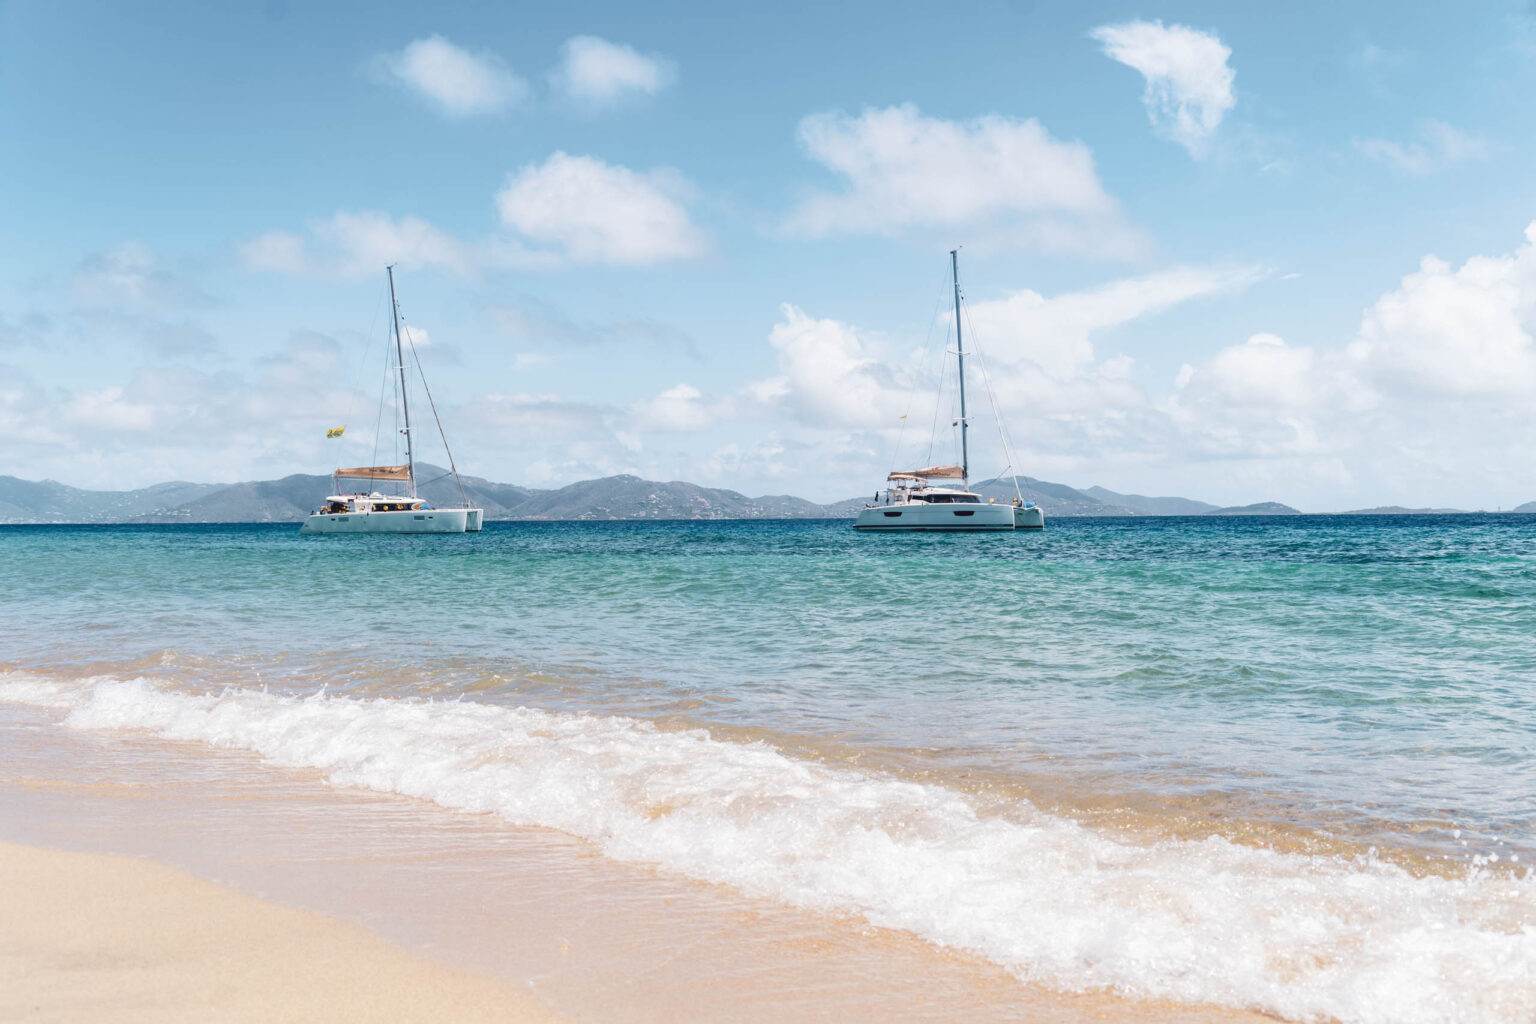 Two sailboats on a beach in the caribbean.